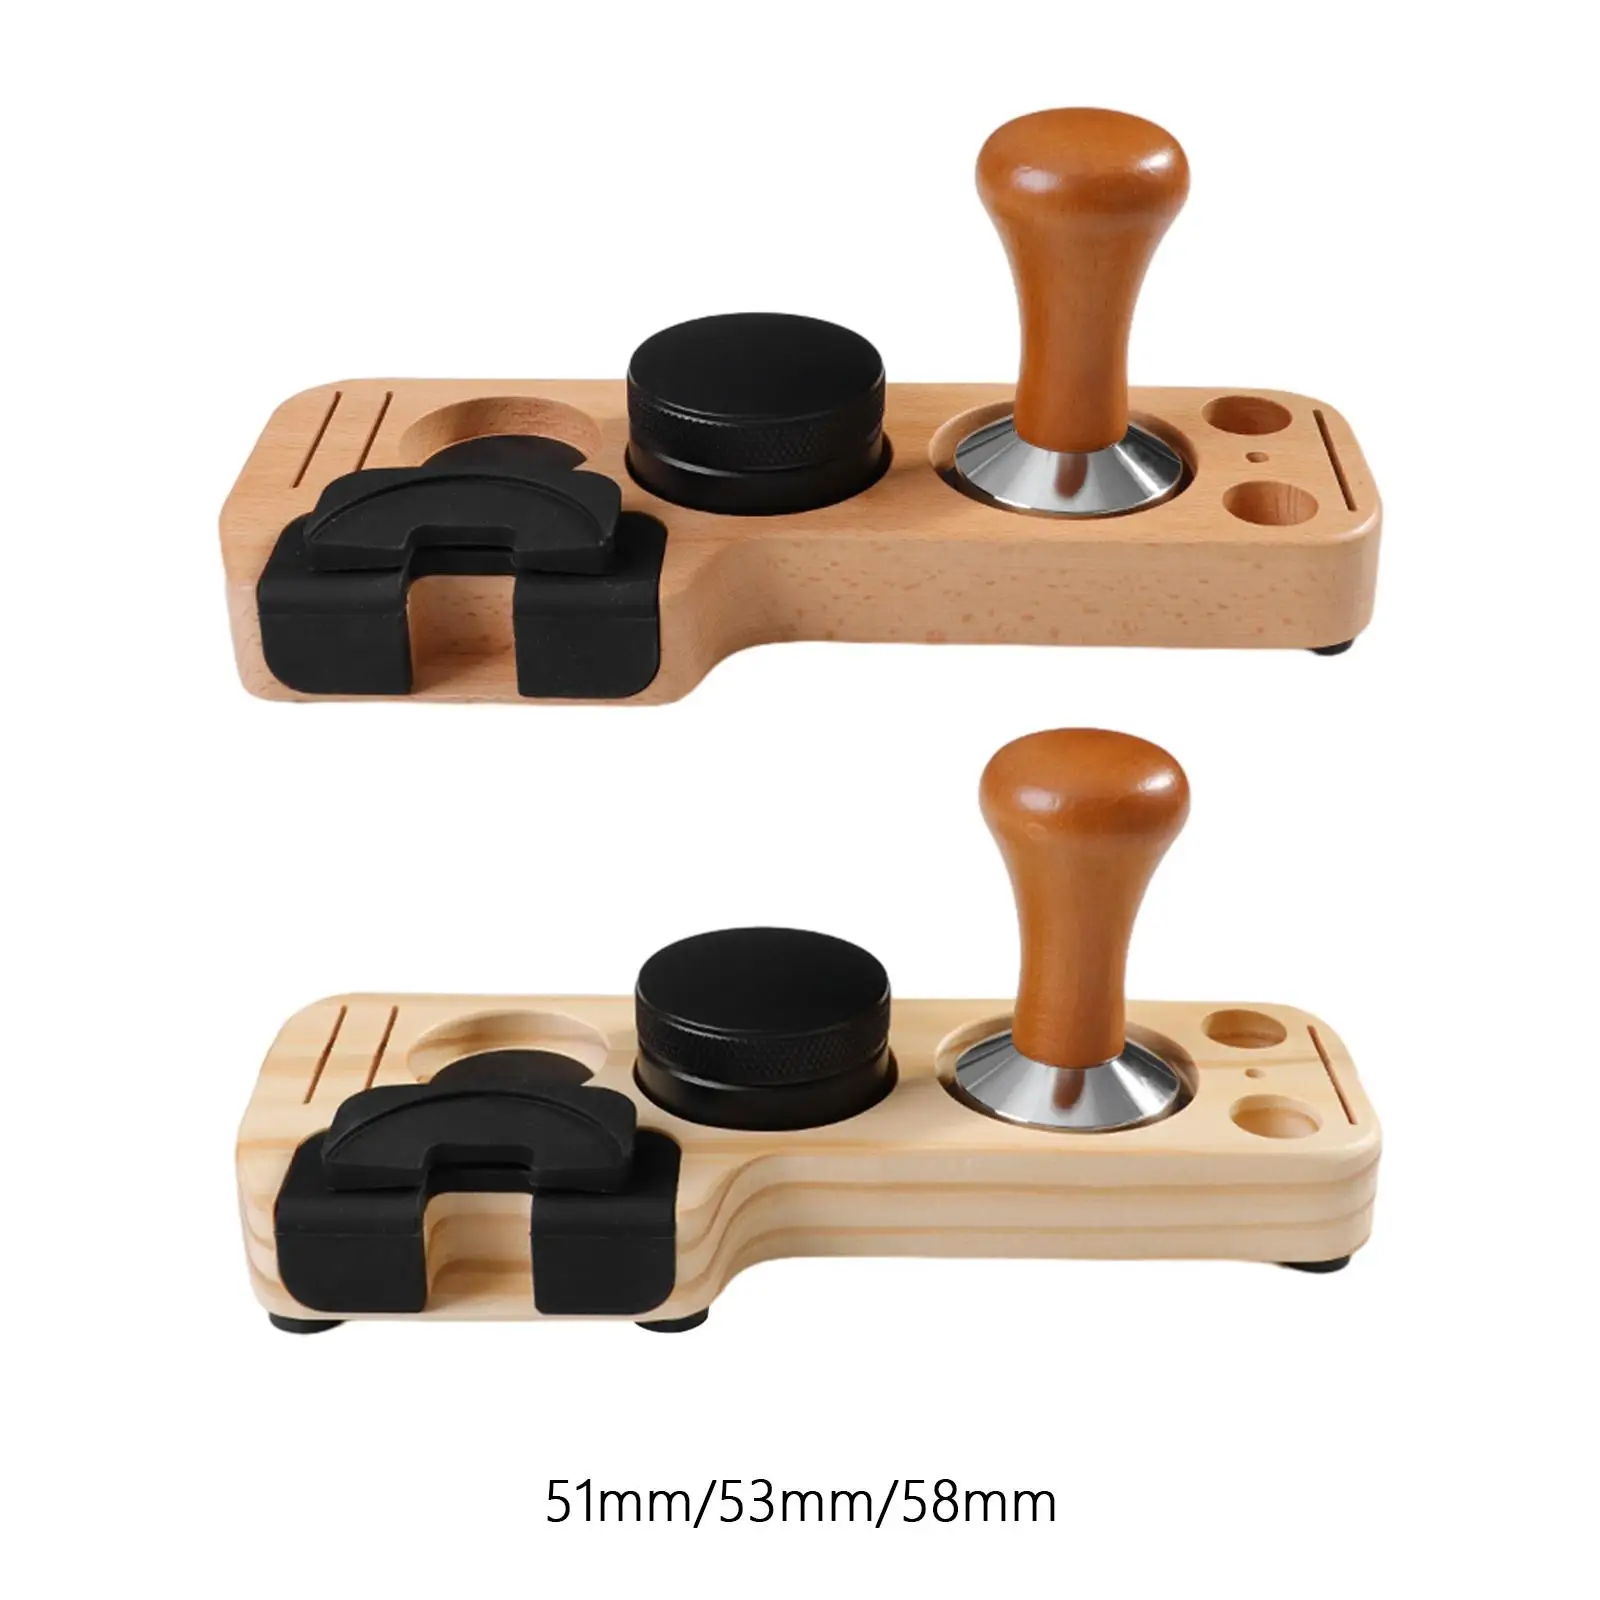 Wood Coffee Filter Tamper Holder Kits Non Slip for Counters Tearoom Kitchens